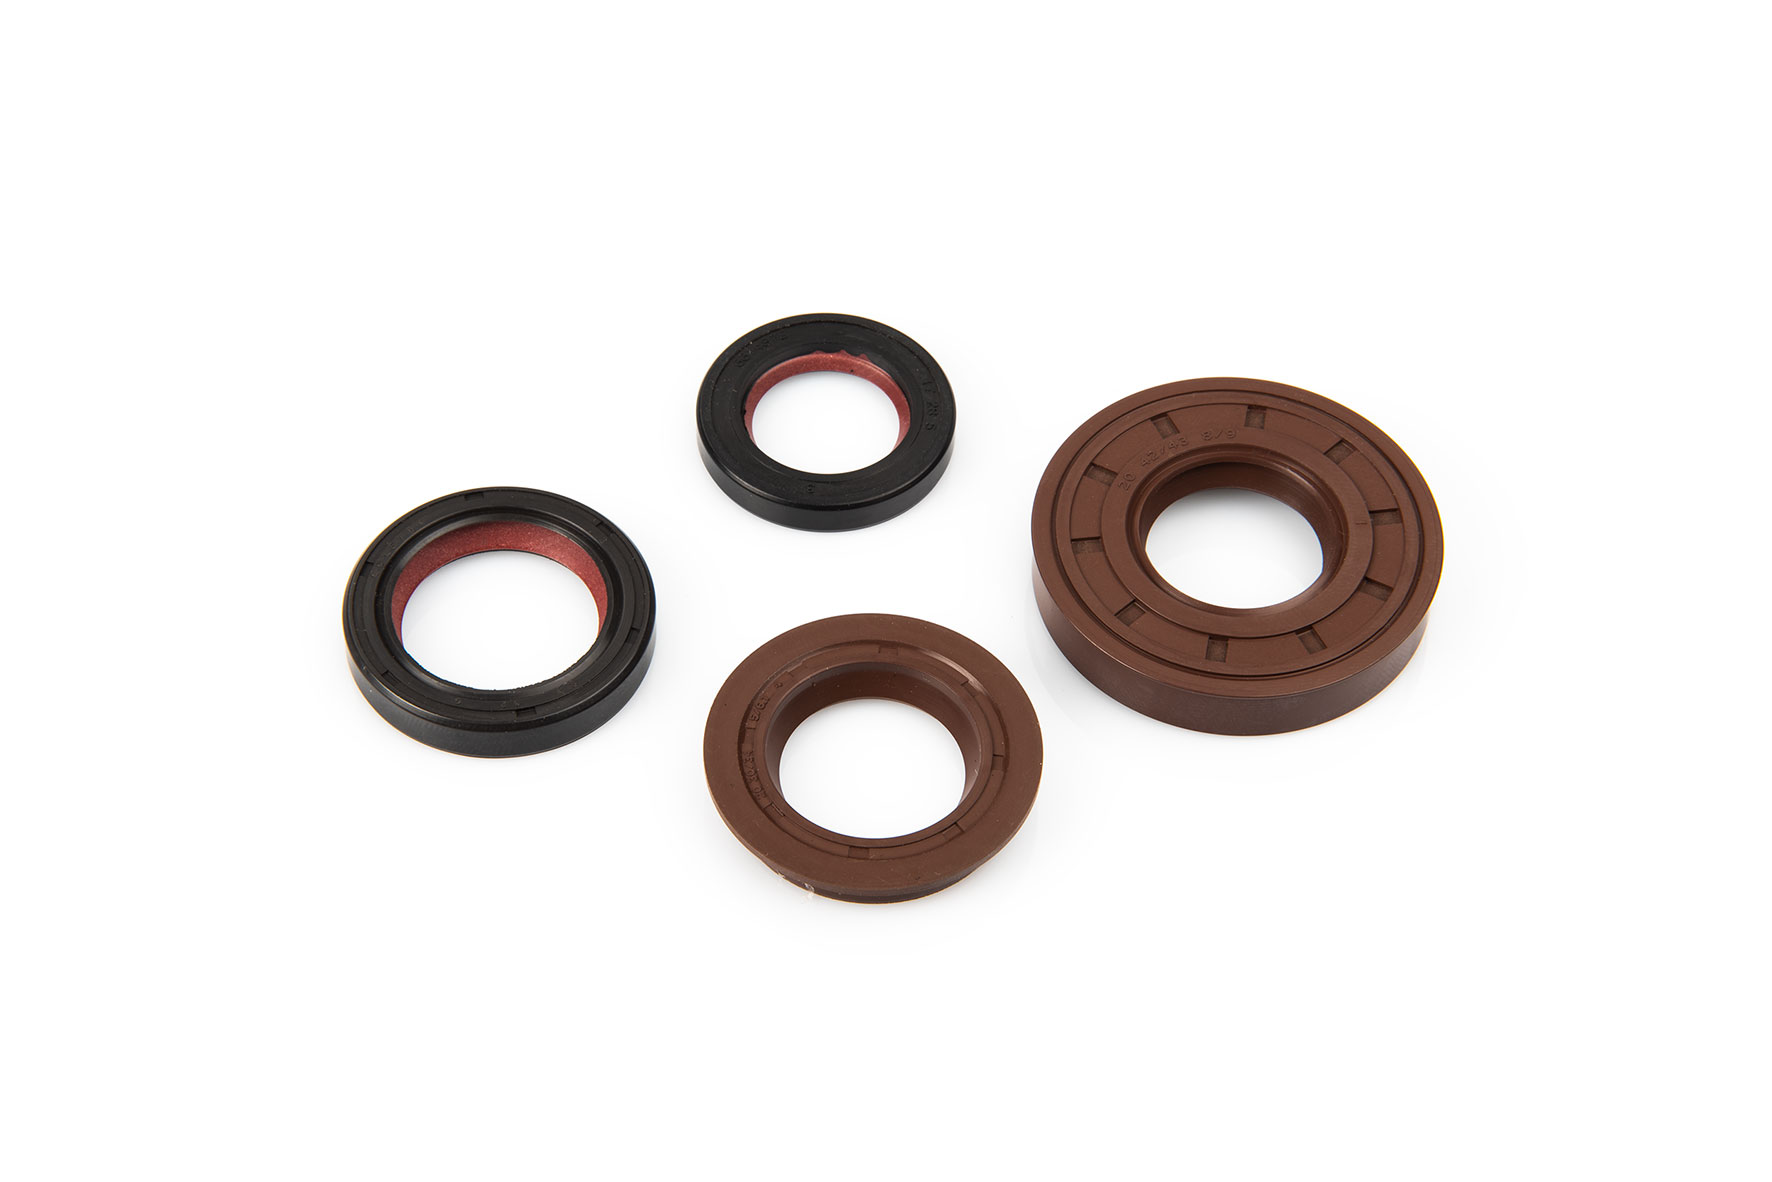 Malossi FKM / PTFE oil seal set for overhaul for Minarelli - Yamaha scooter and Quad 2T 50 cc